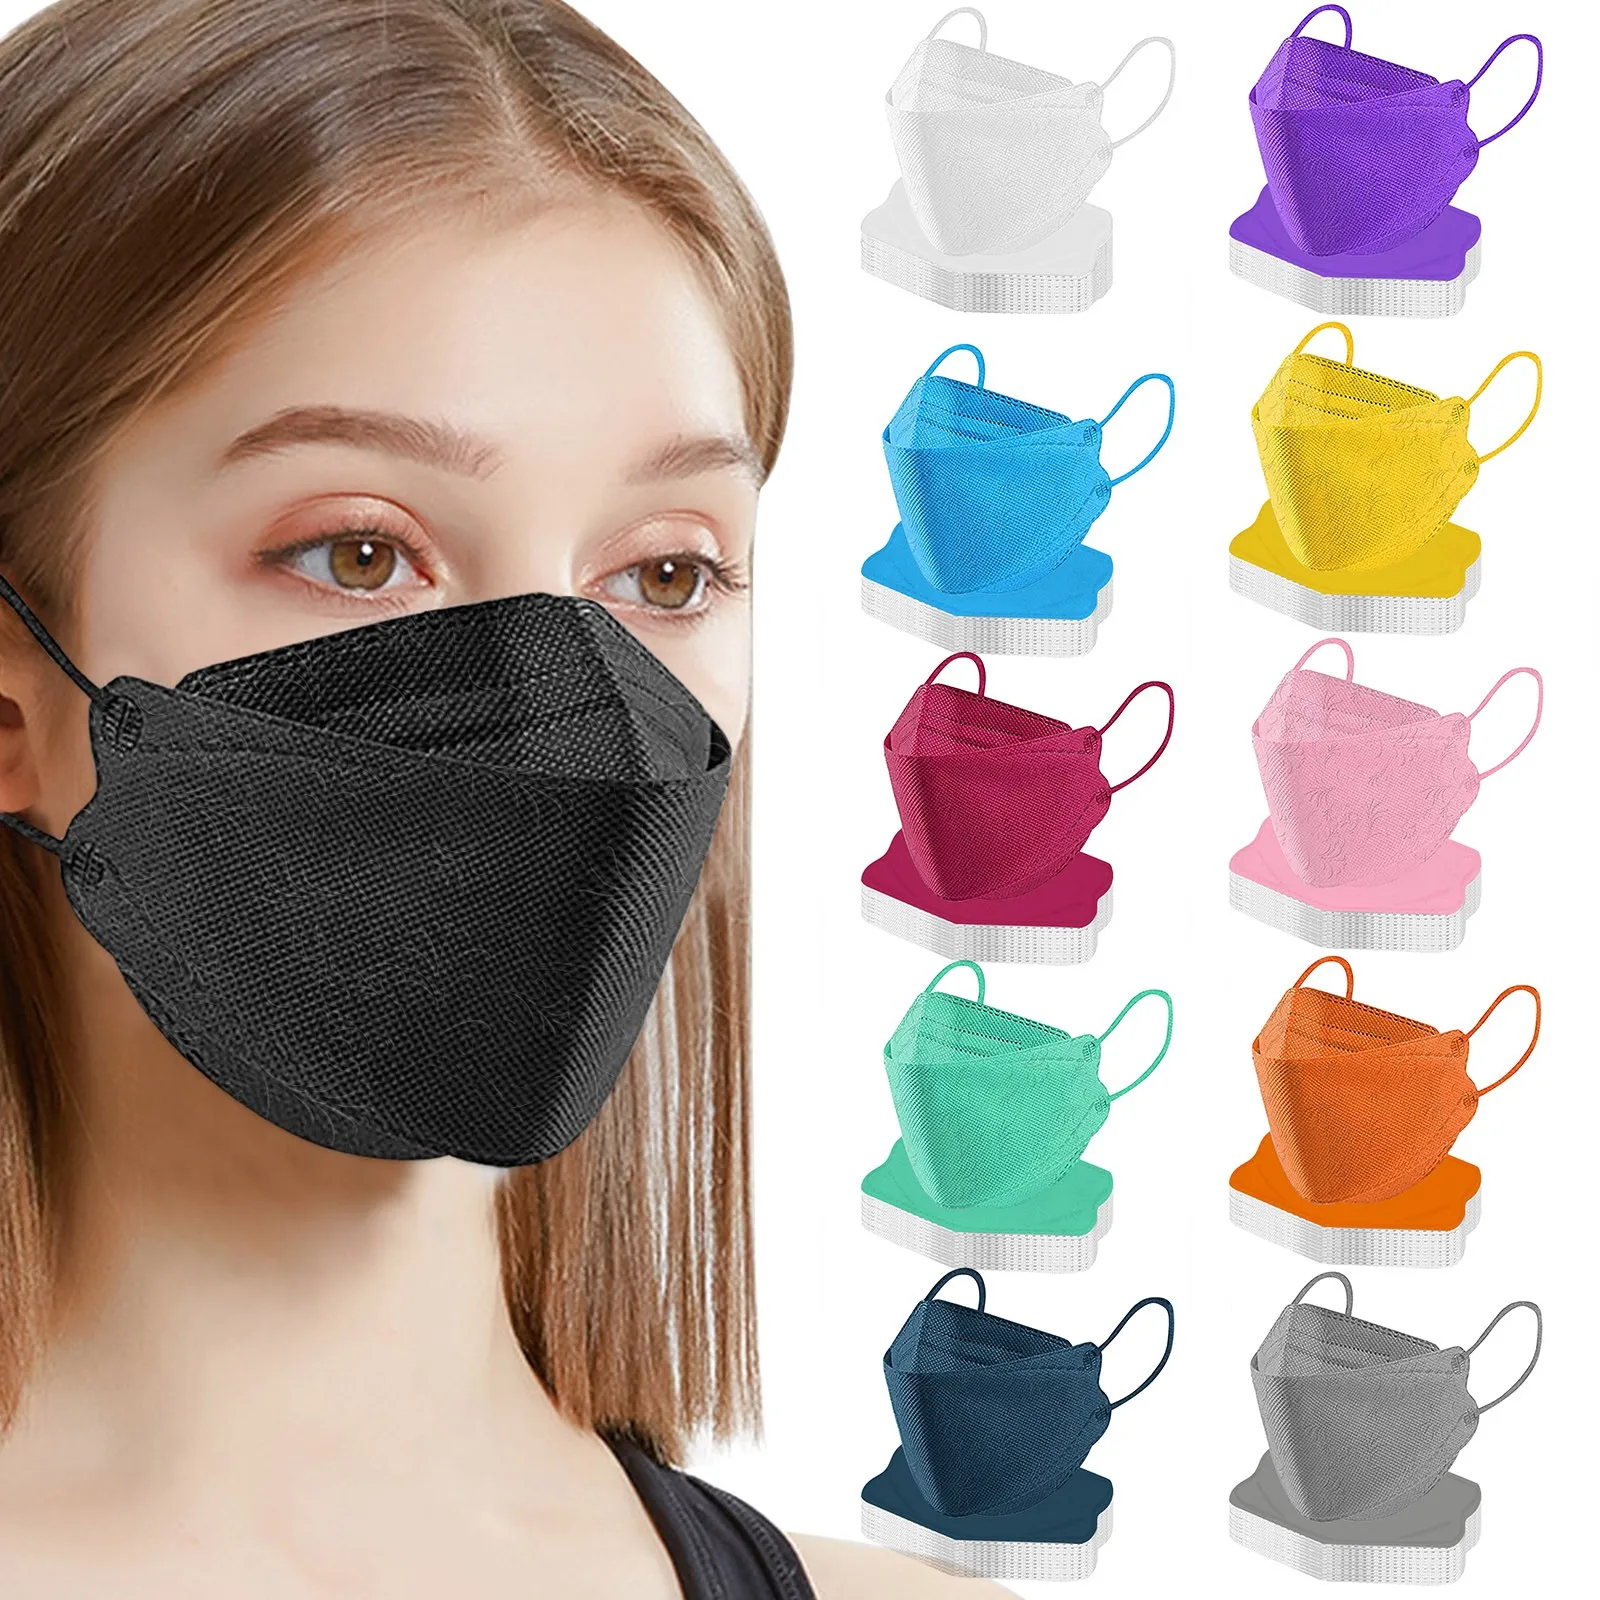 

10pc Adult Outdoor Fish Non Woven Face Mask 4-ply Facemasks Mouth Masque Mascarillas Desechables Jetables Halloween Cosplay